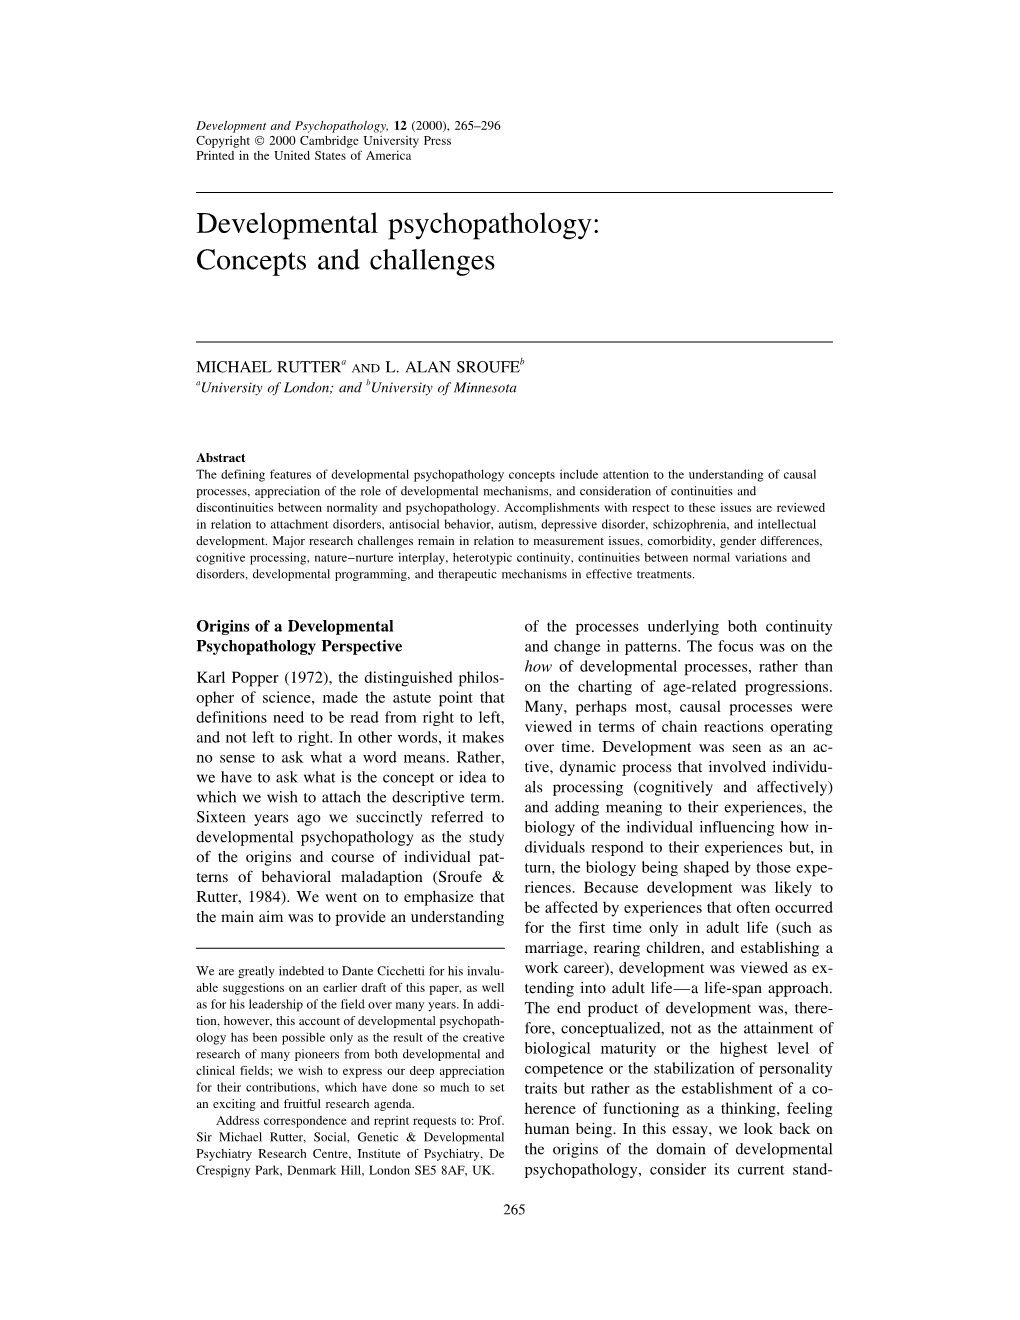 Developmental Psychopathology: Concepts and Challenges